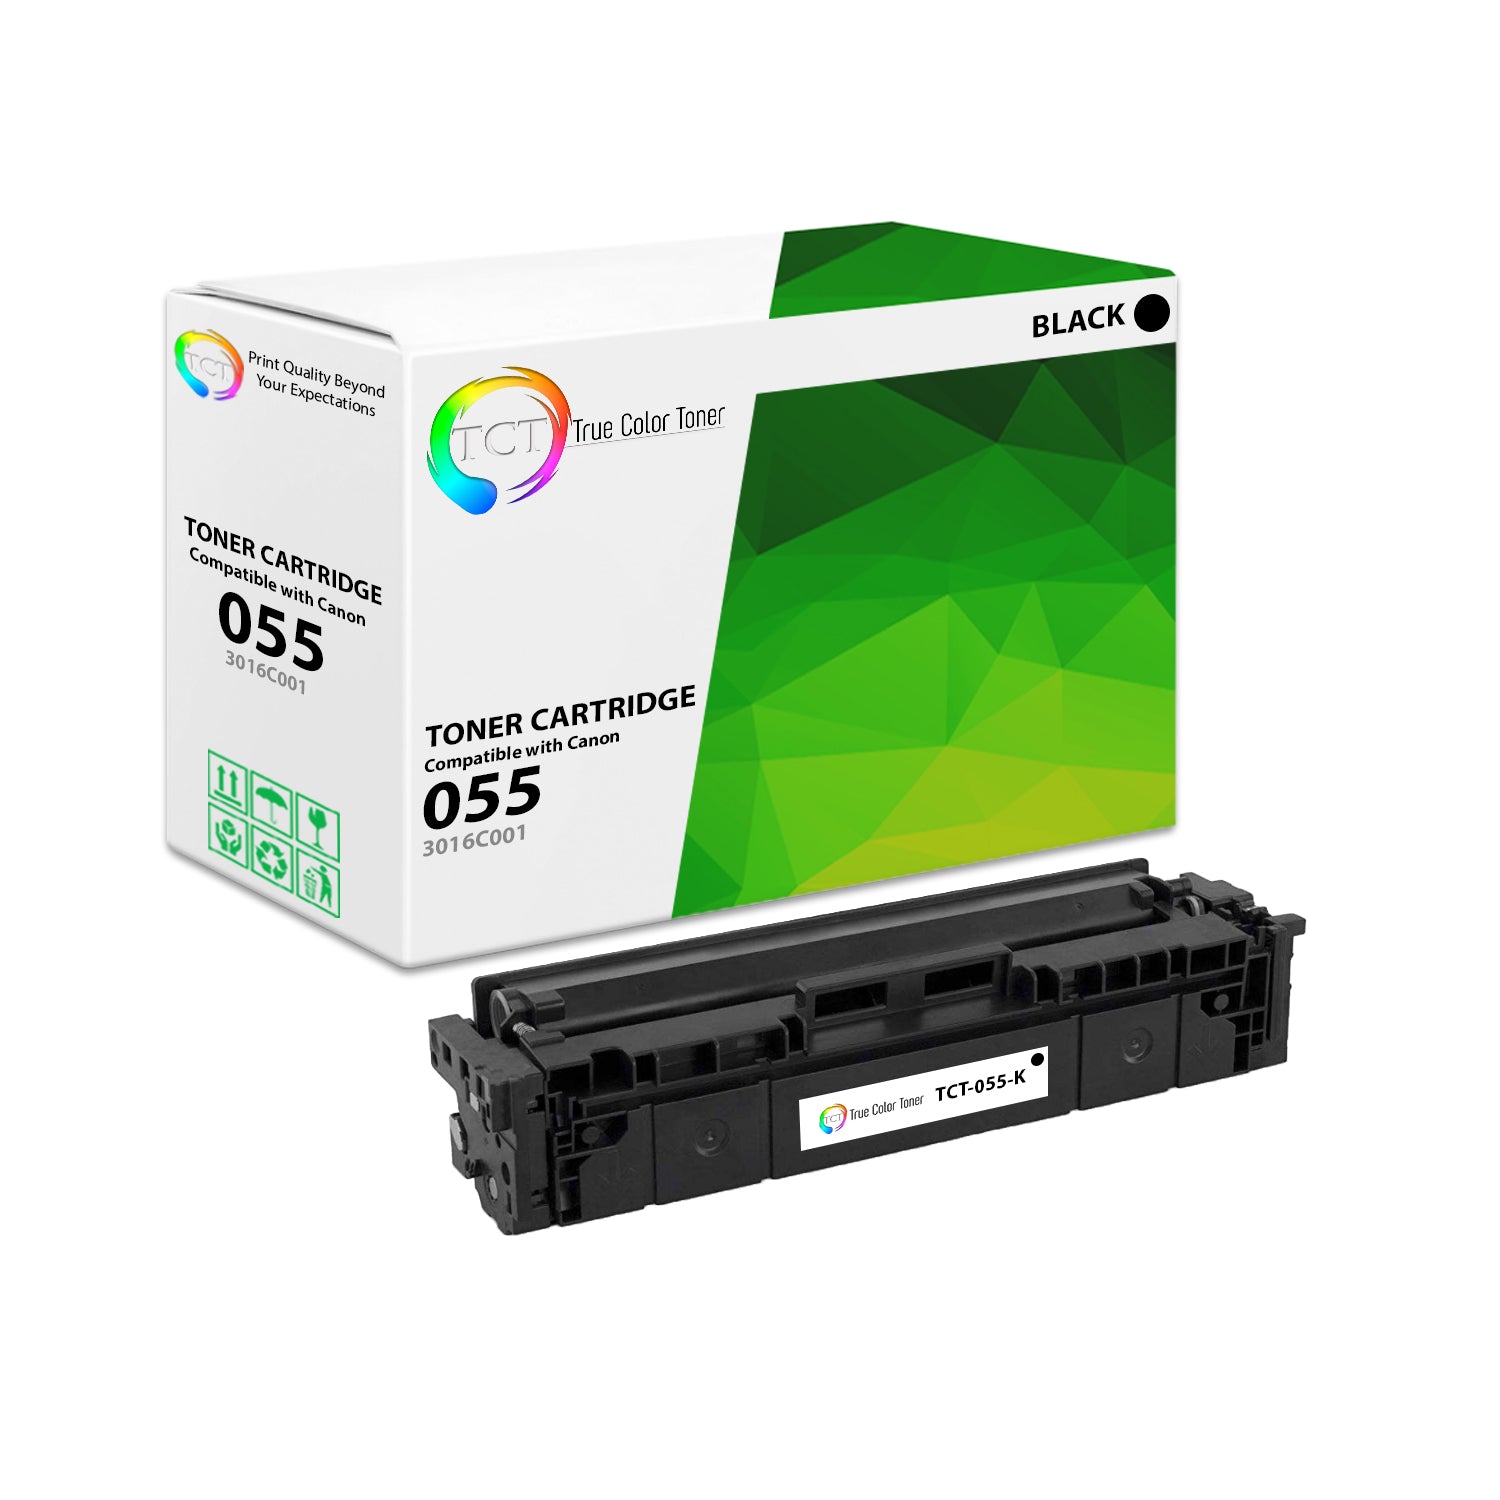 TCT Compatible Toner Cartridge Replacement for the Canon 055 Series - 1 Pack Black